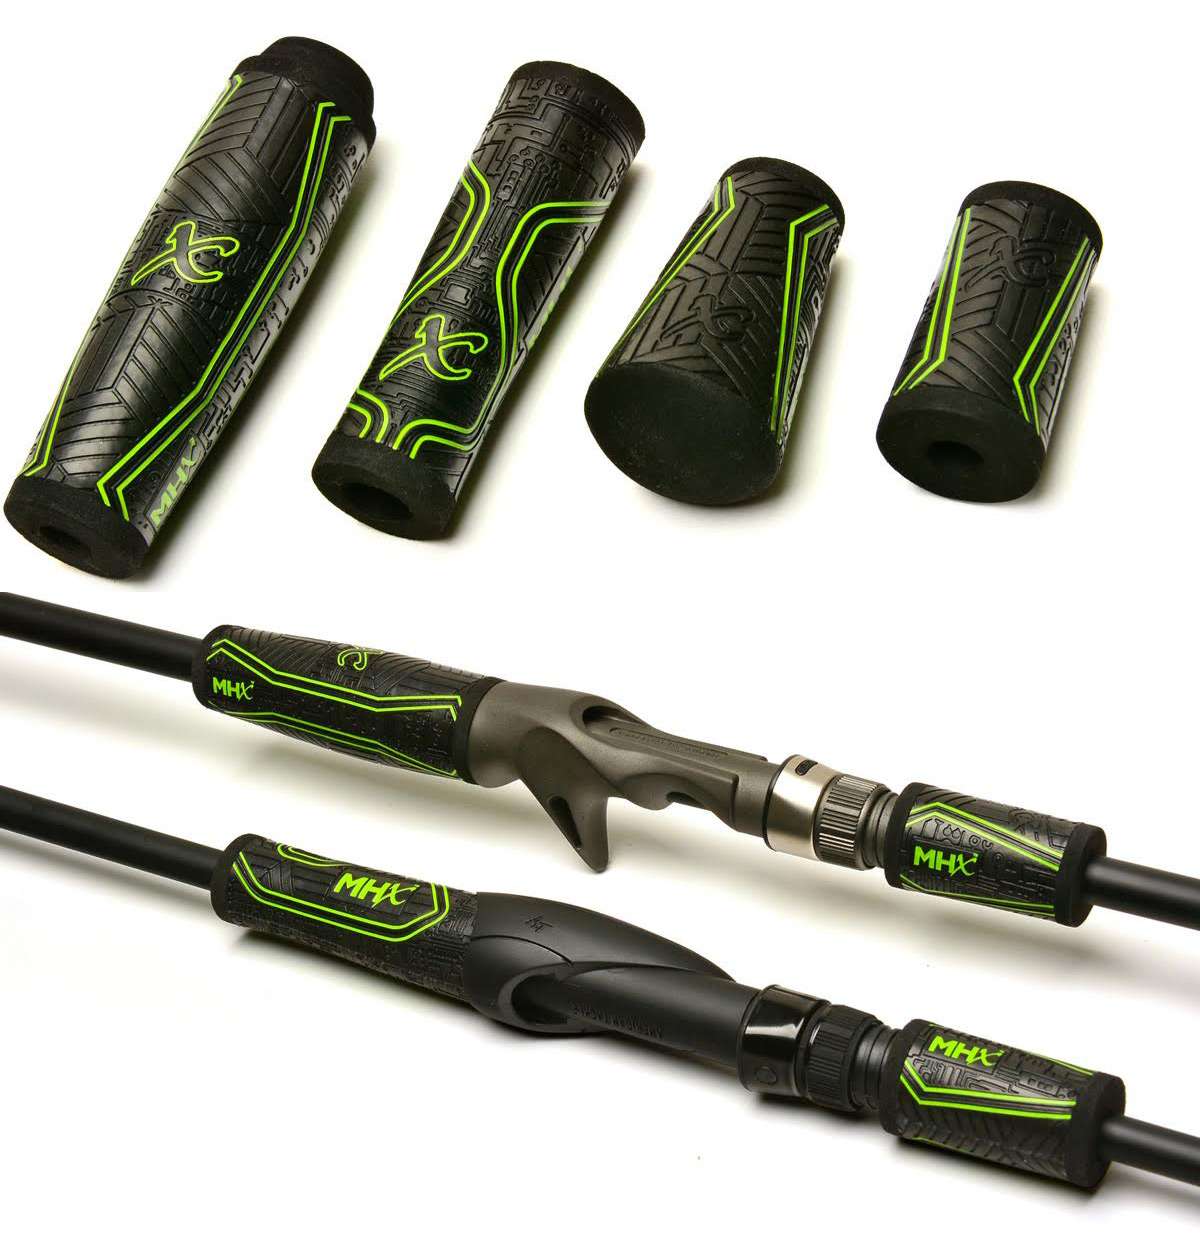 <b>Mud Hole Custom Tackle</b><br>	MHX Winn Grips<br>	These are brand new MHX branded Winn Grips are made to match the MHX Line of rod blanks from Mud Hole Custom Tackle. Made with Winnâs patented WINNDRY Polymer material they have taken their most popular EVA Grip shapes and kicked them up a notch with the help of Winn Grips. Each piece is sold individually for a truly custom configuration. 